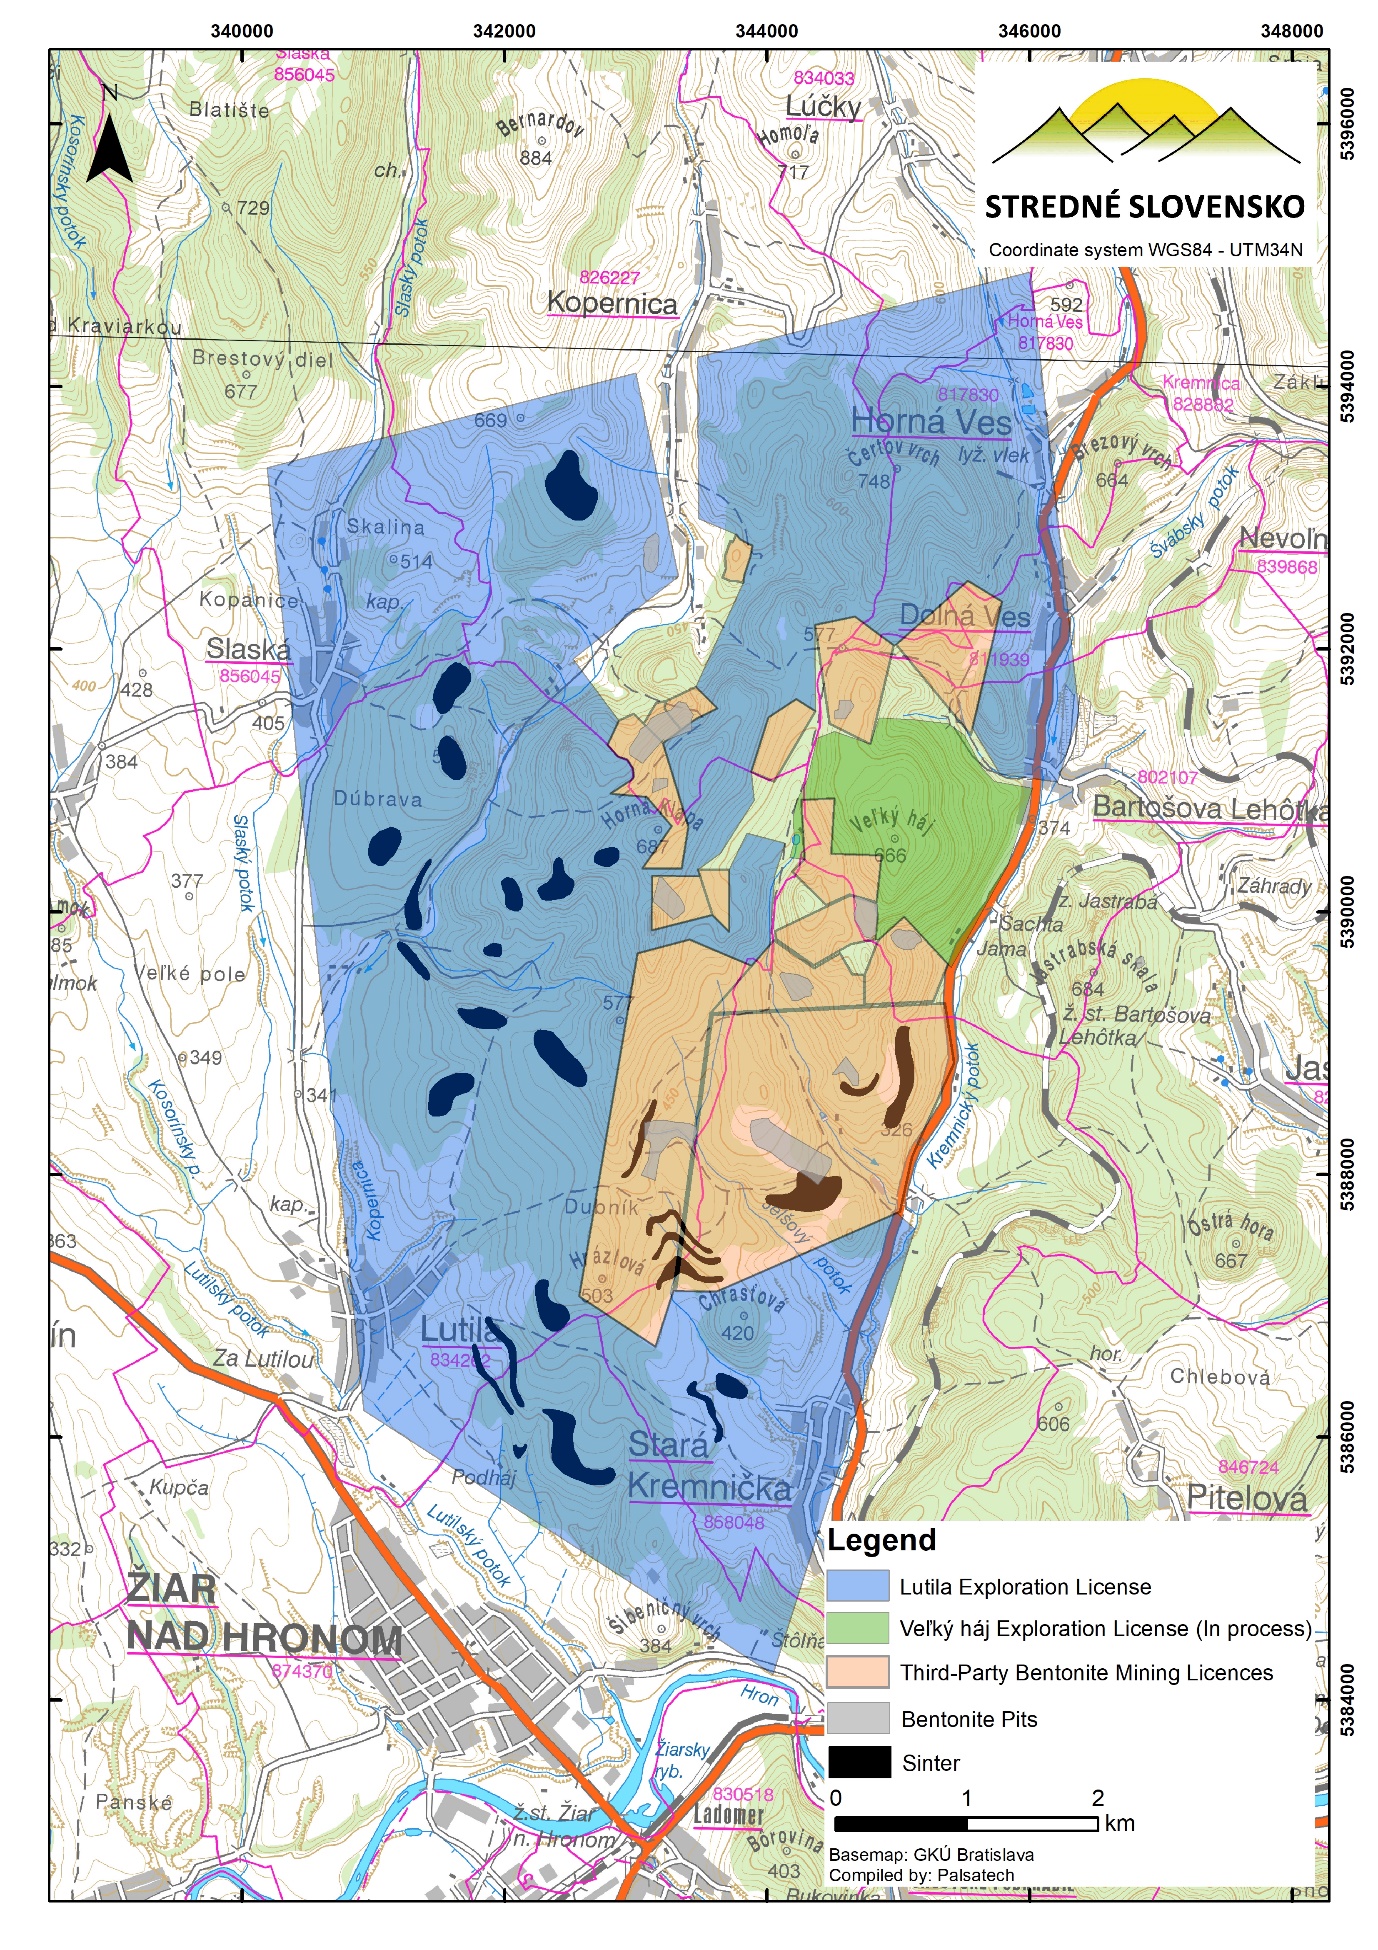 Figure 3. The Lutila Exploration Licence – Topography, Tenure, Sinters and Bentonite Open Pits.